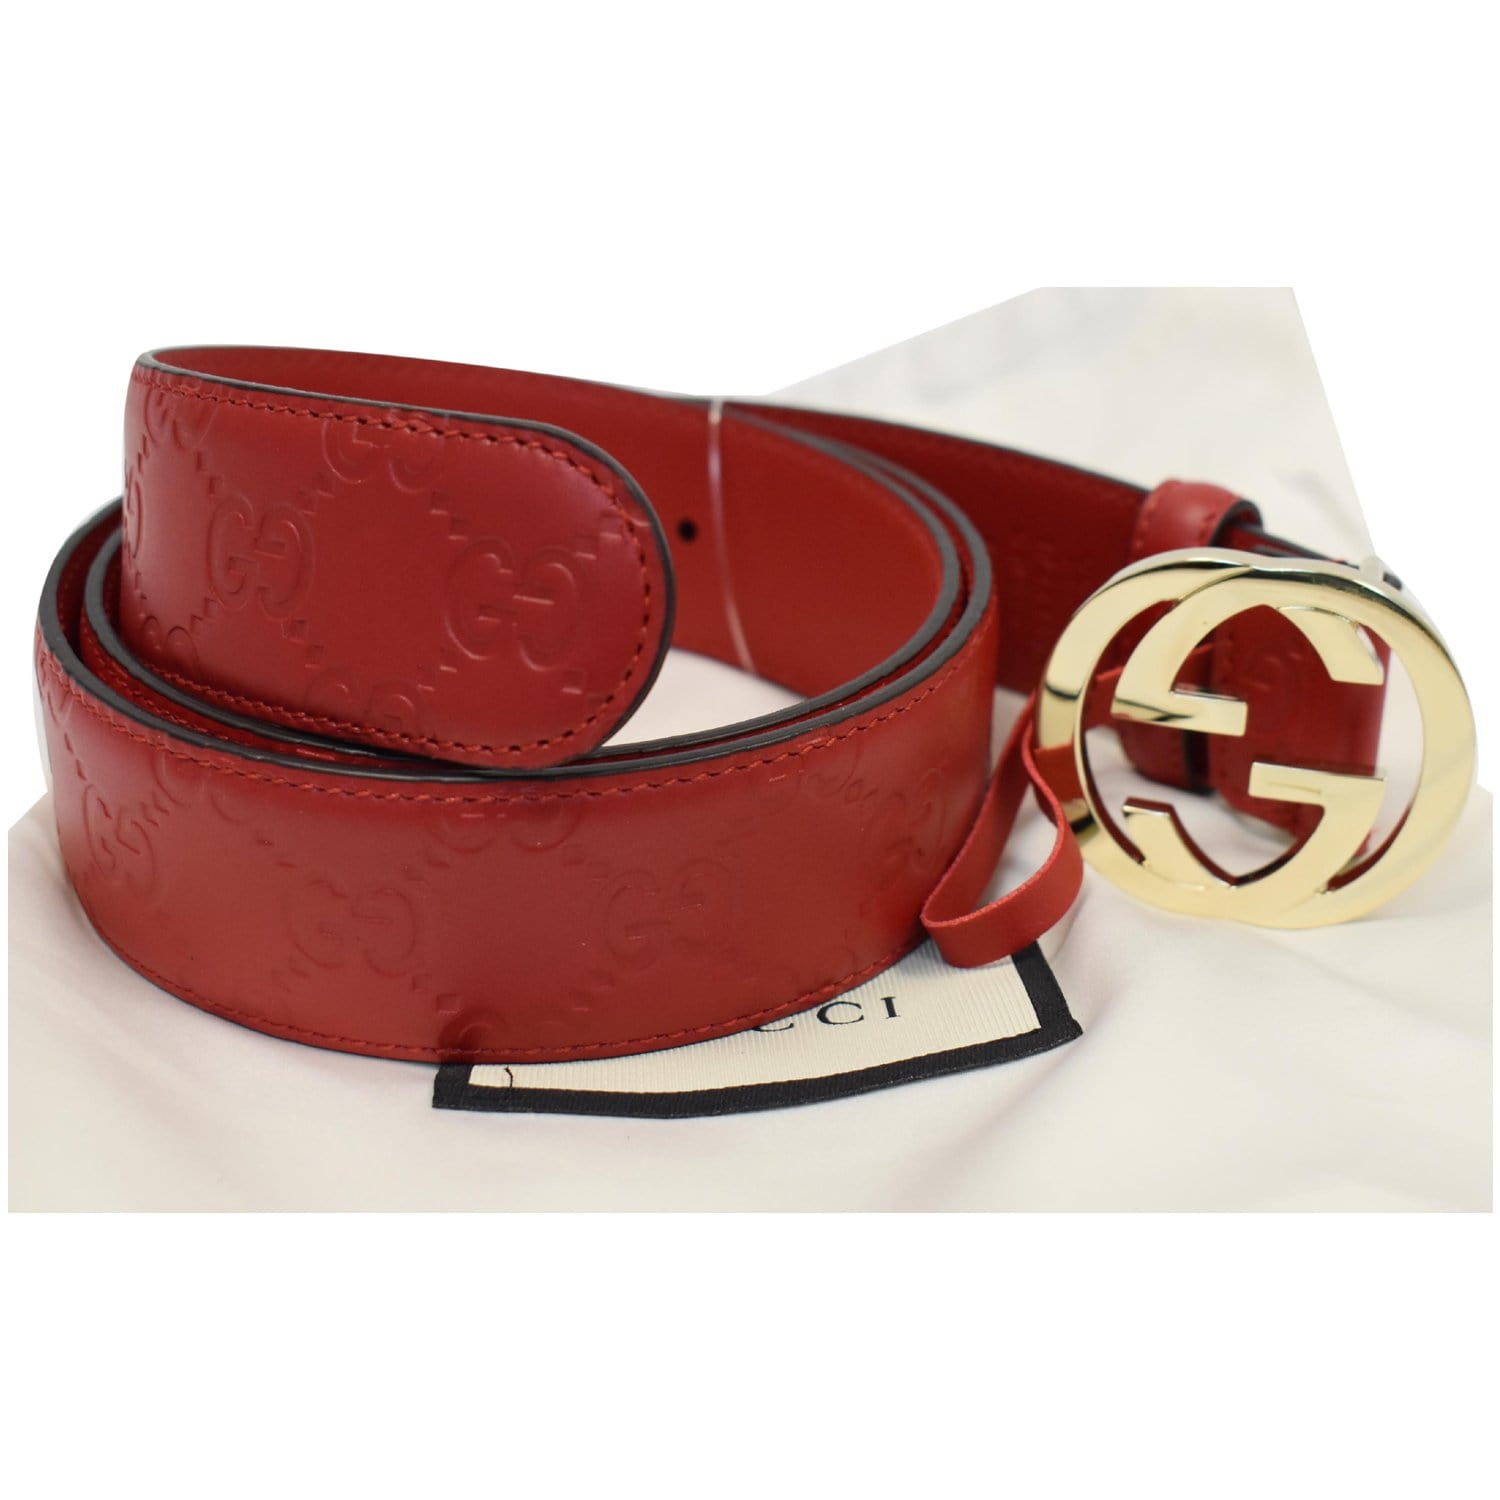 Gucci Signature Leather Belt Red 370543 Size 90/36